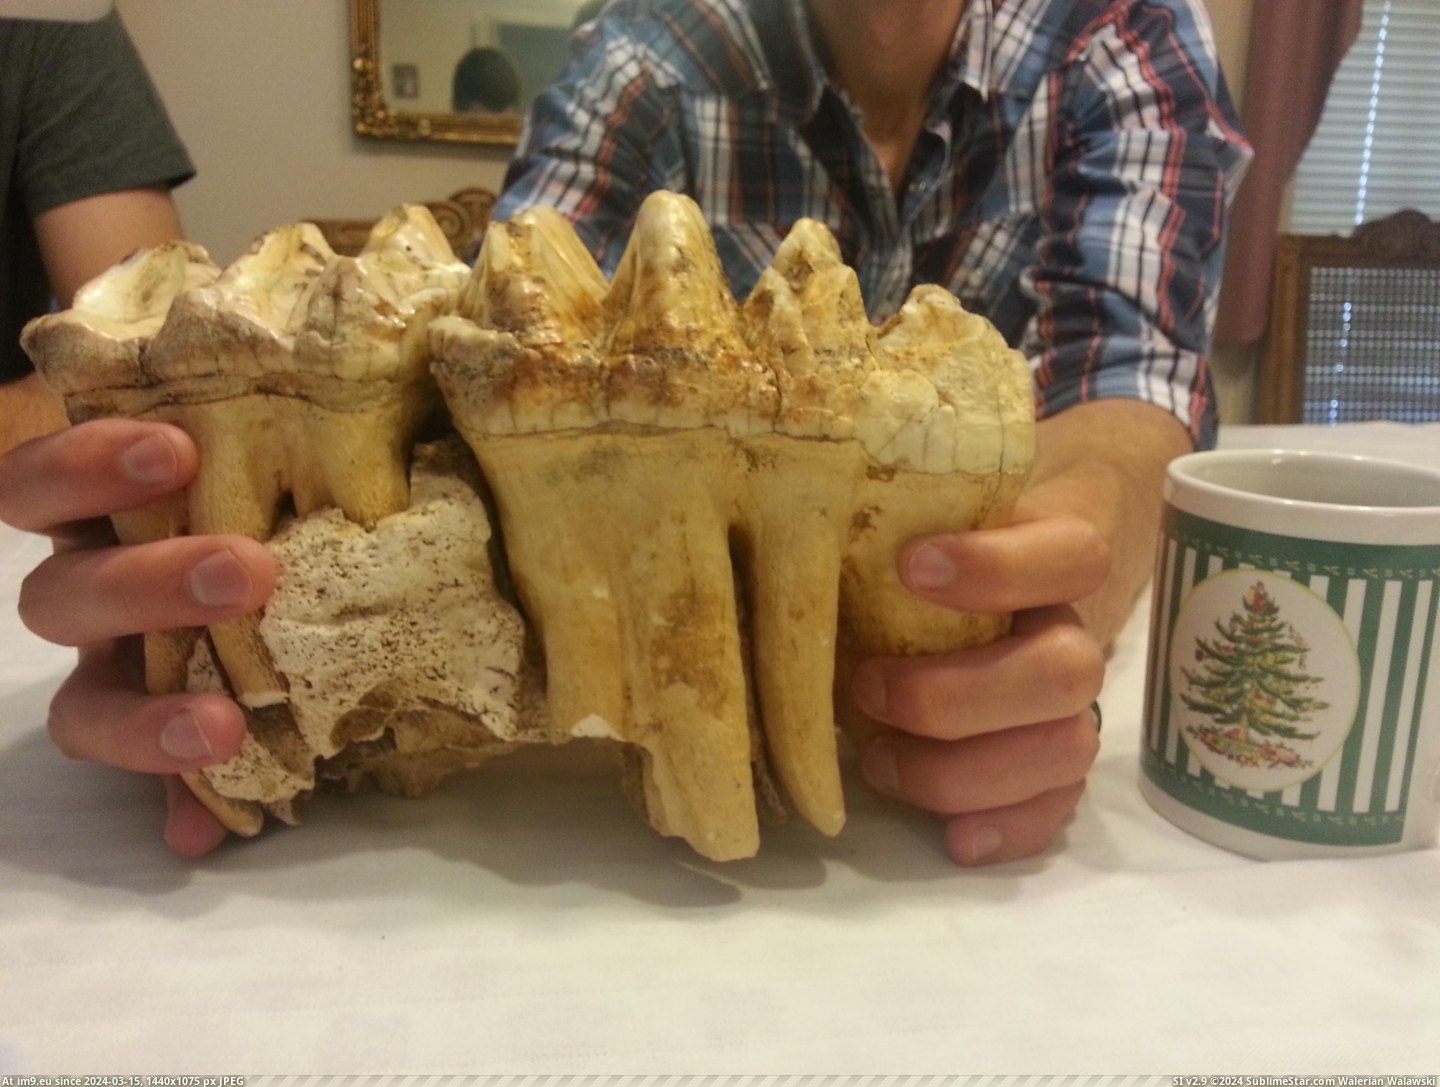 #Scale #Coffee #Cup #Cave #Teeth #Arkansas #Mastodon #Northern #Grandpa #Pair [Pics] In 1964 my grandpa found a pair of mastodon teeth in a cave in northern Arkansas- the coffee cup is for scale. Pic. (Image of album My r/PICS favs))